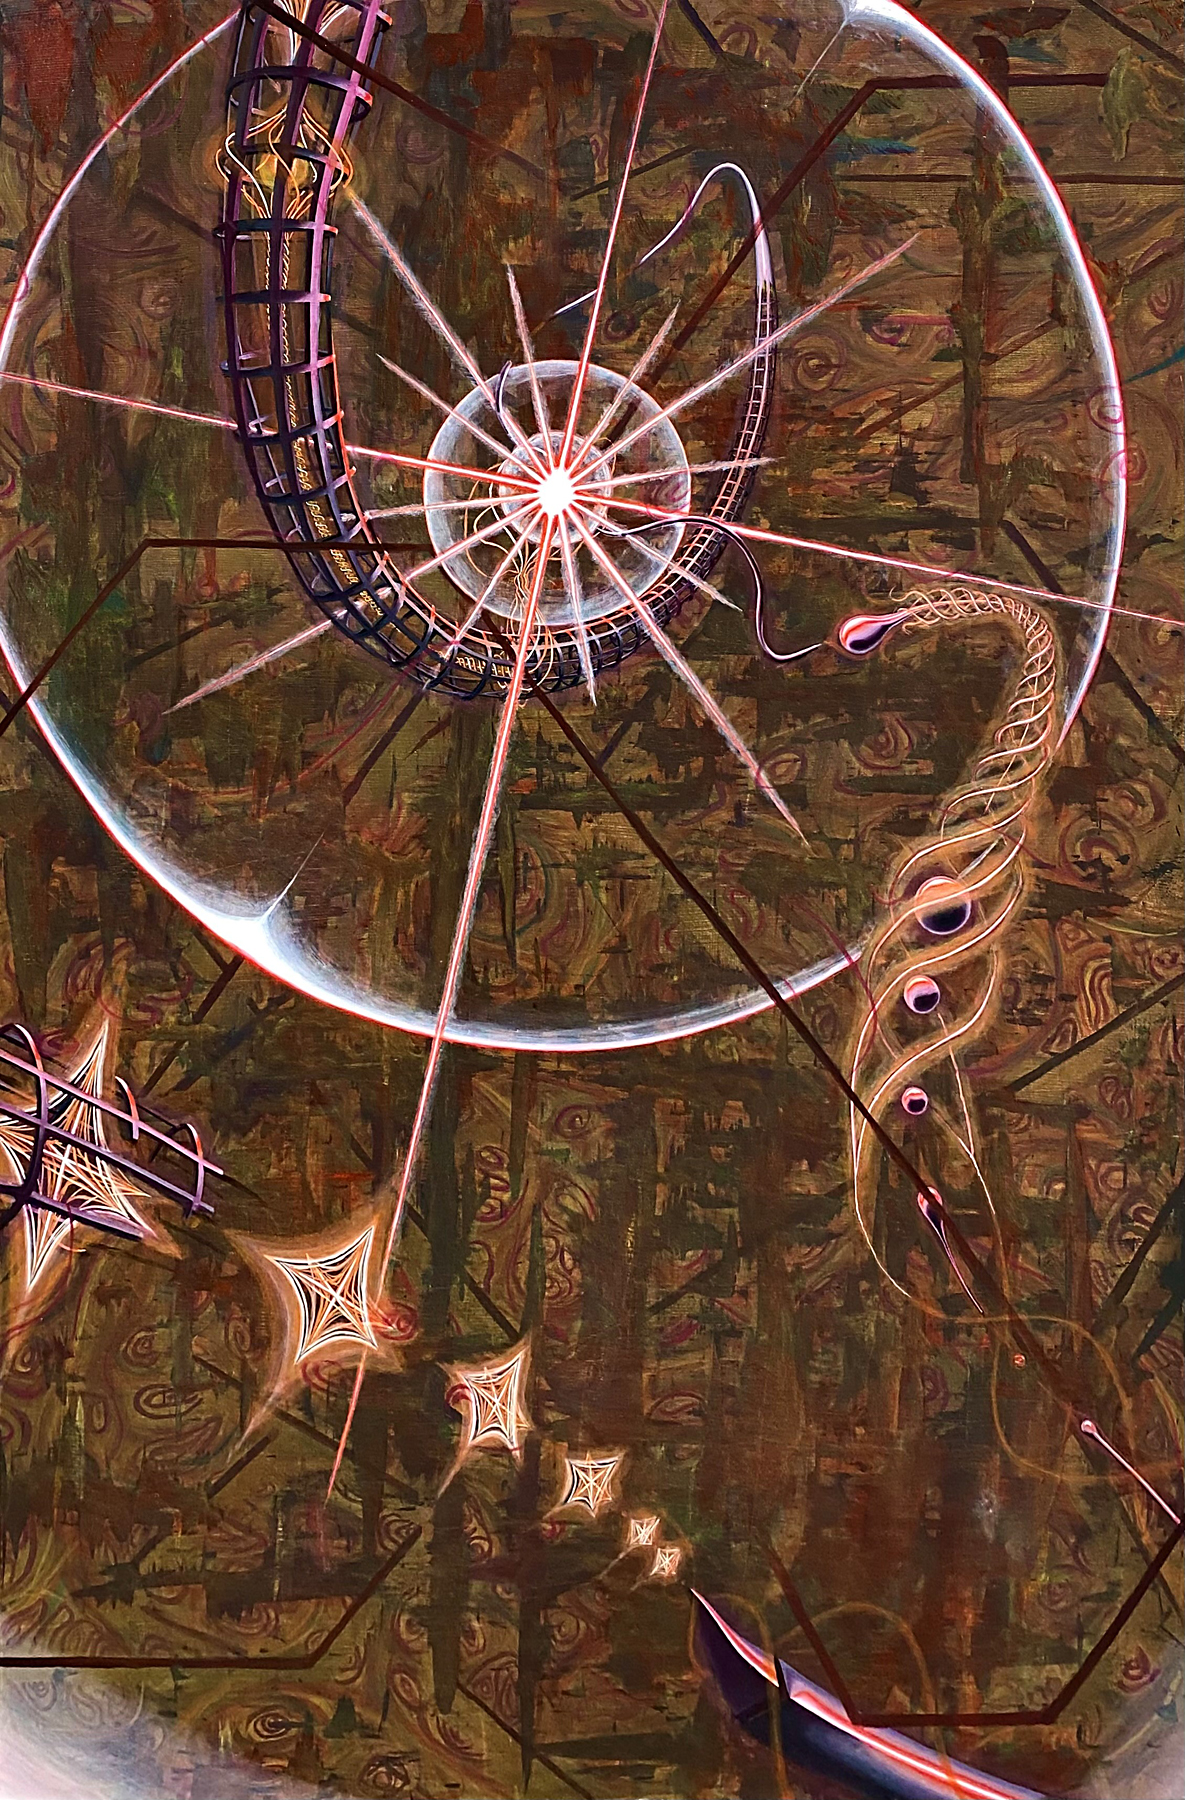 A bright starburst explodes outward from a series of circles of light. Connected to the starburst are organic forms that resemble machinery or strands of DNA. The background of the image is in muted colors and depicts different landscape scenes.